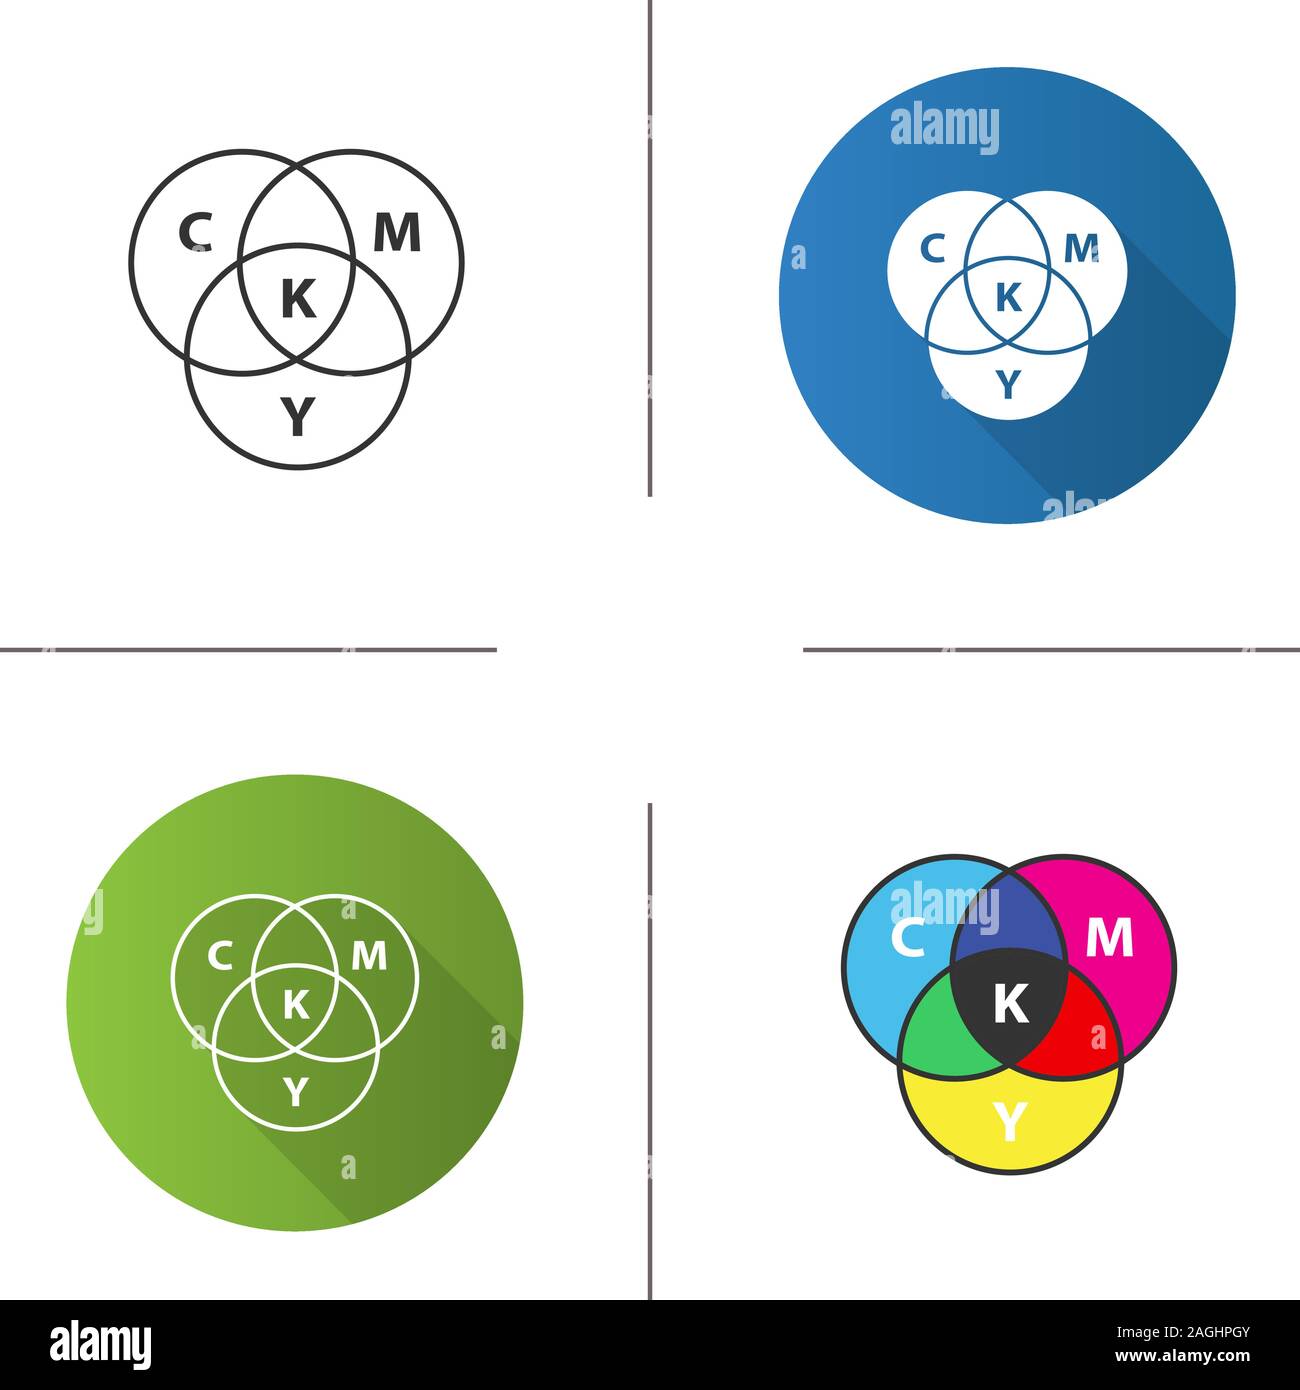 CMYK circle model icon. Flat design, linear and color styles. Cyan, magenta, yellow, key color scheme. Isolated vector illustrations Stock Vector